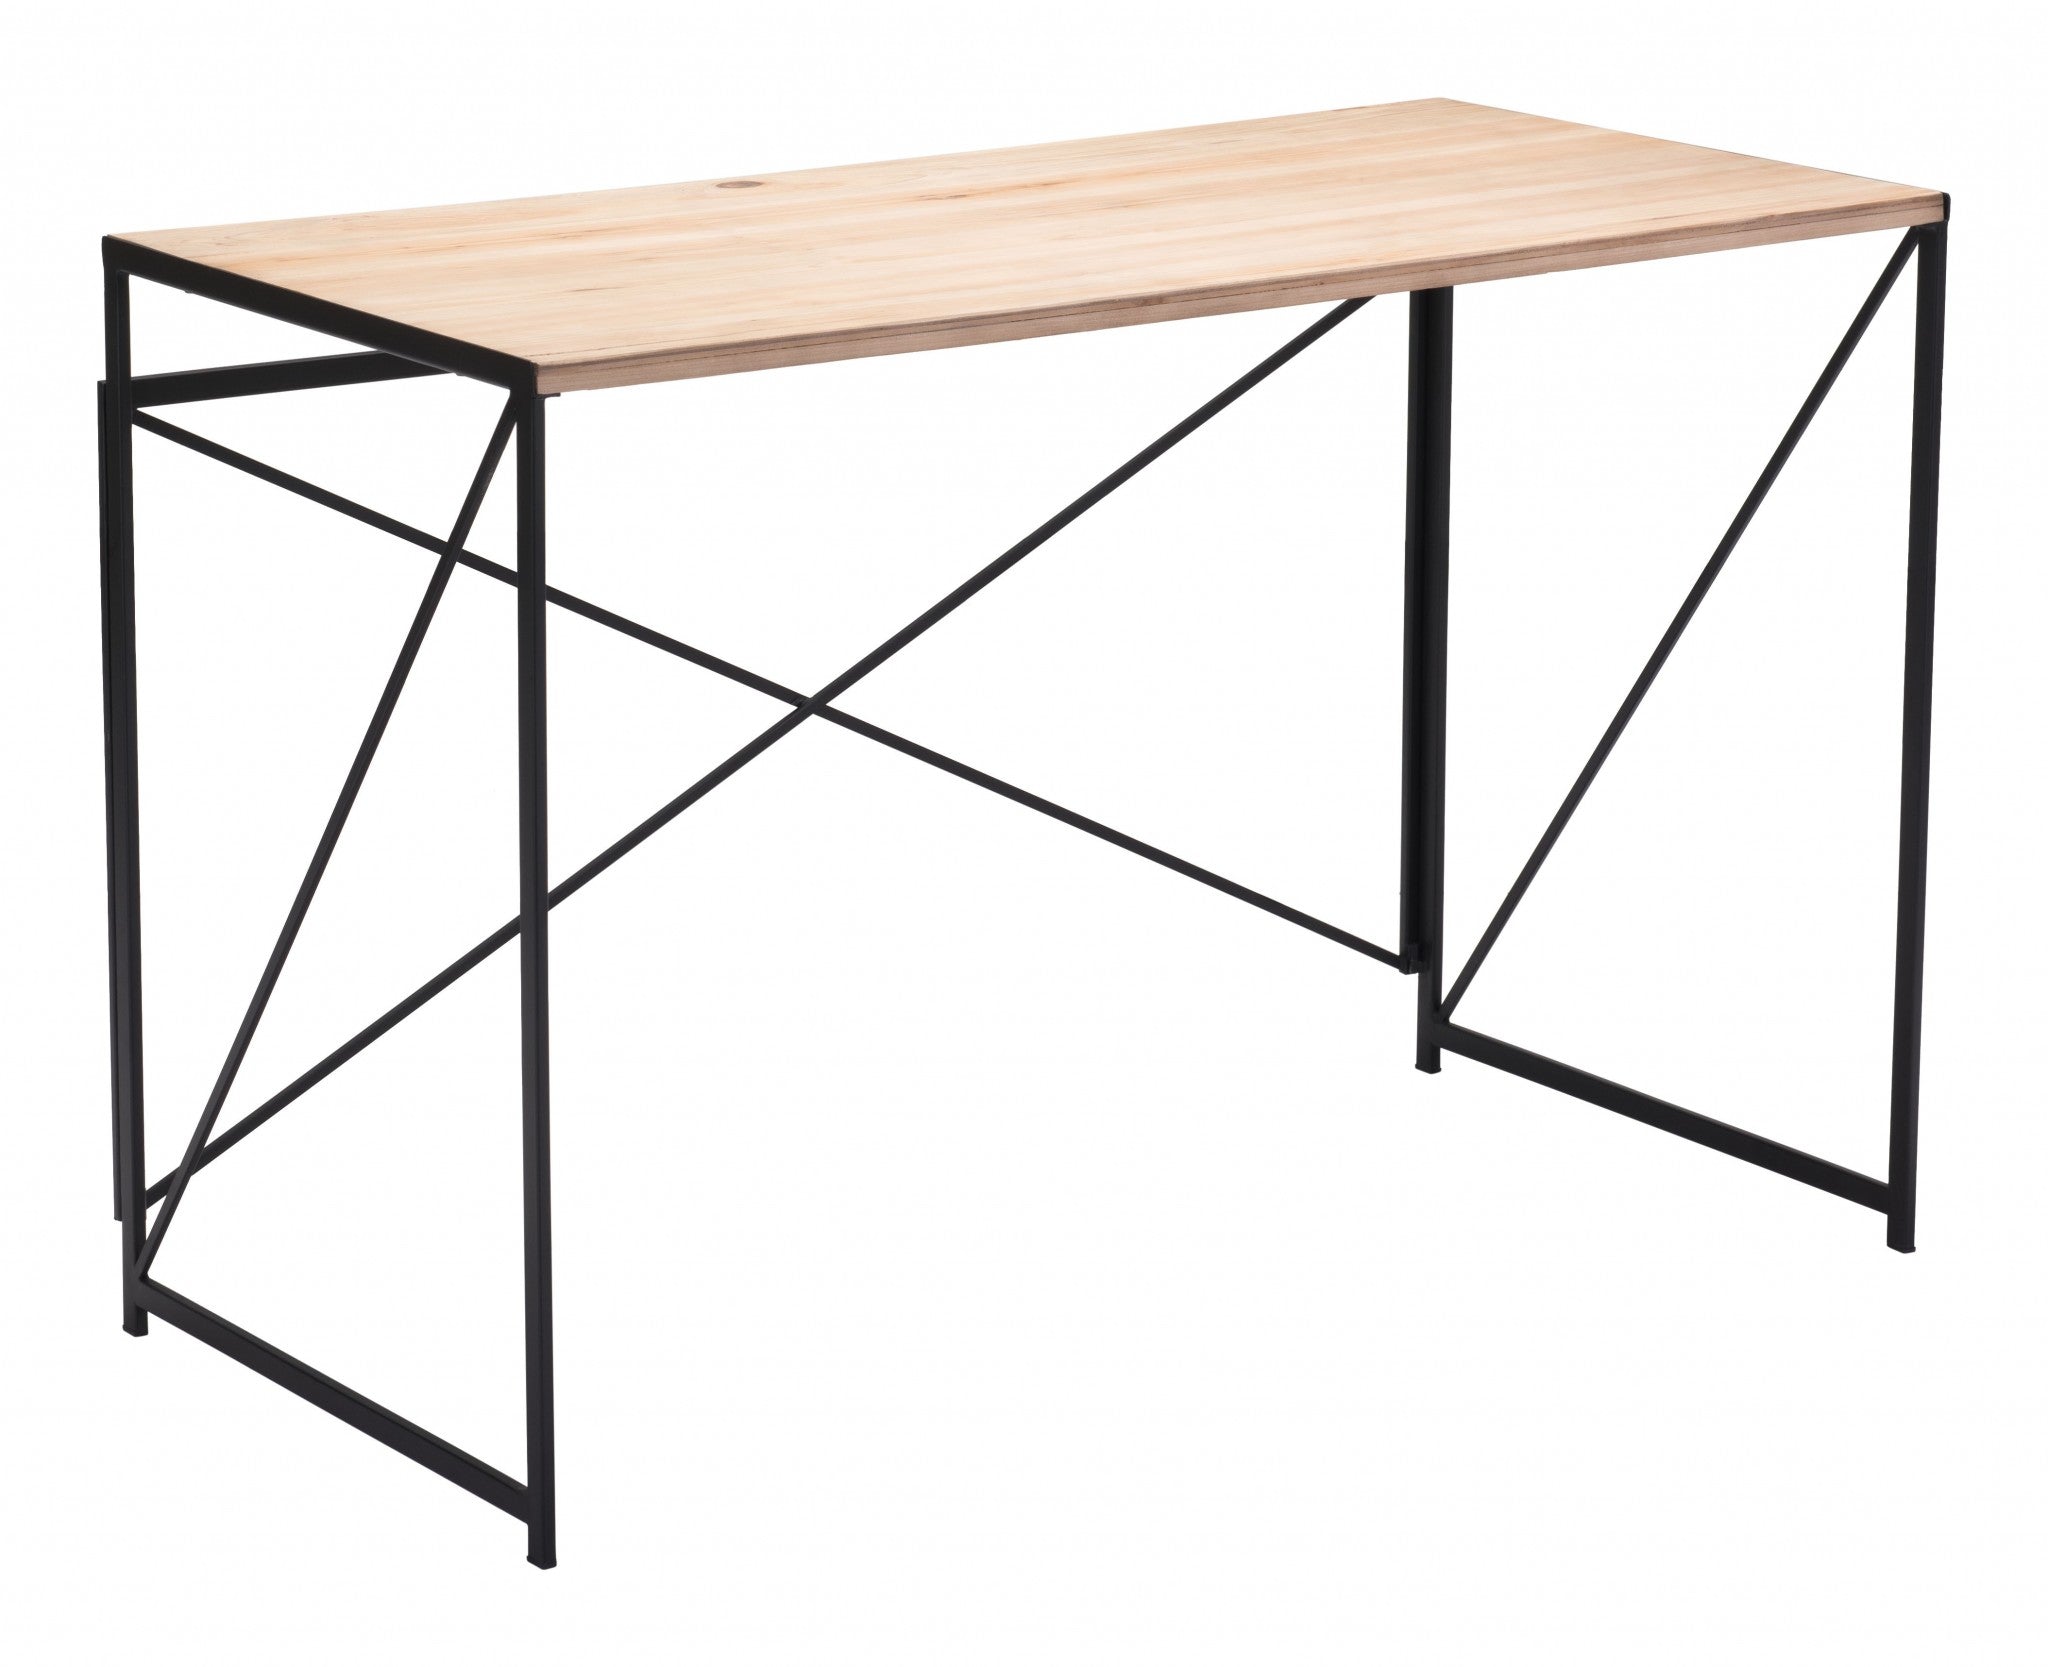 45" Natural and Black Solid Wood Writing Desk